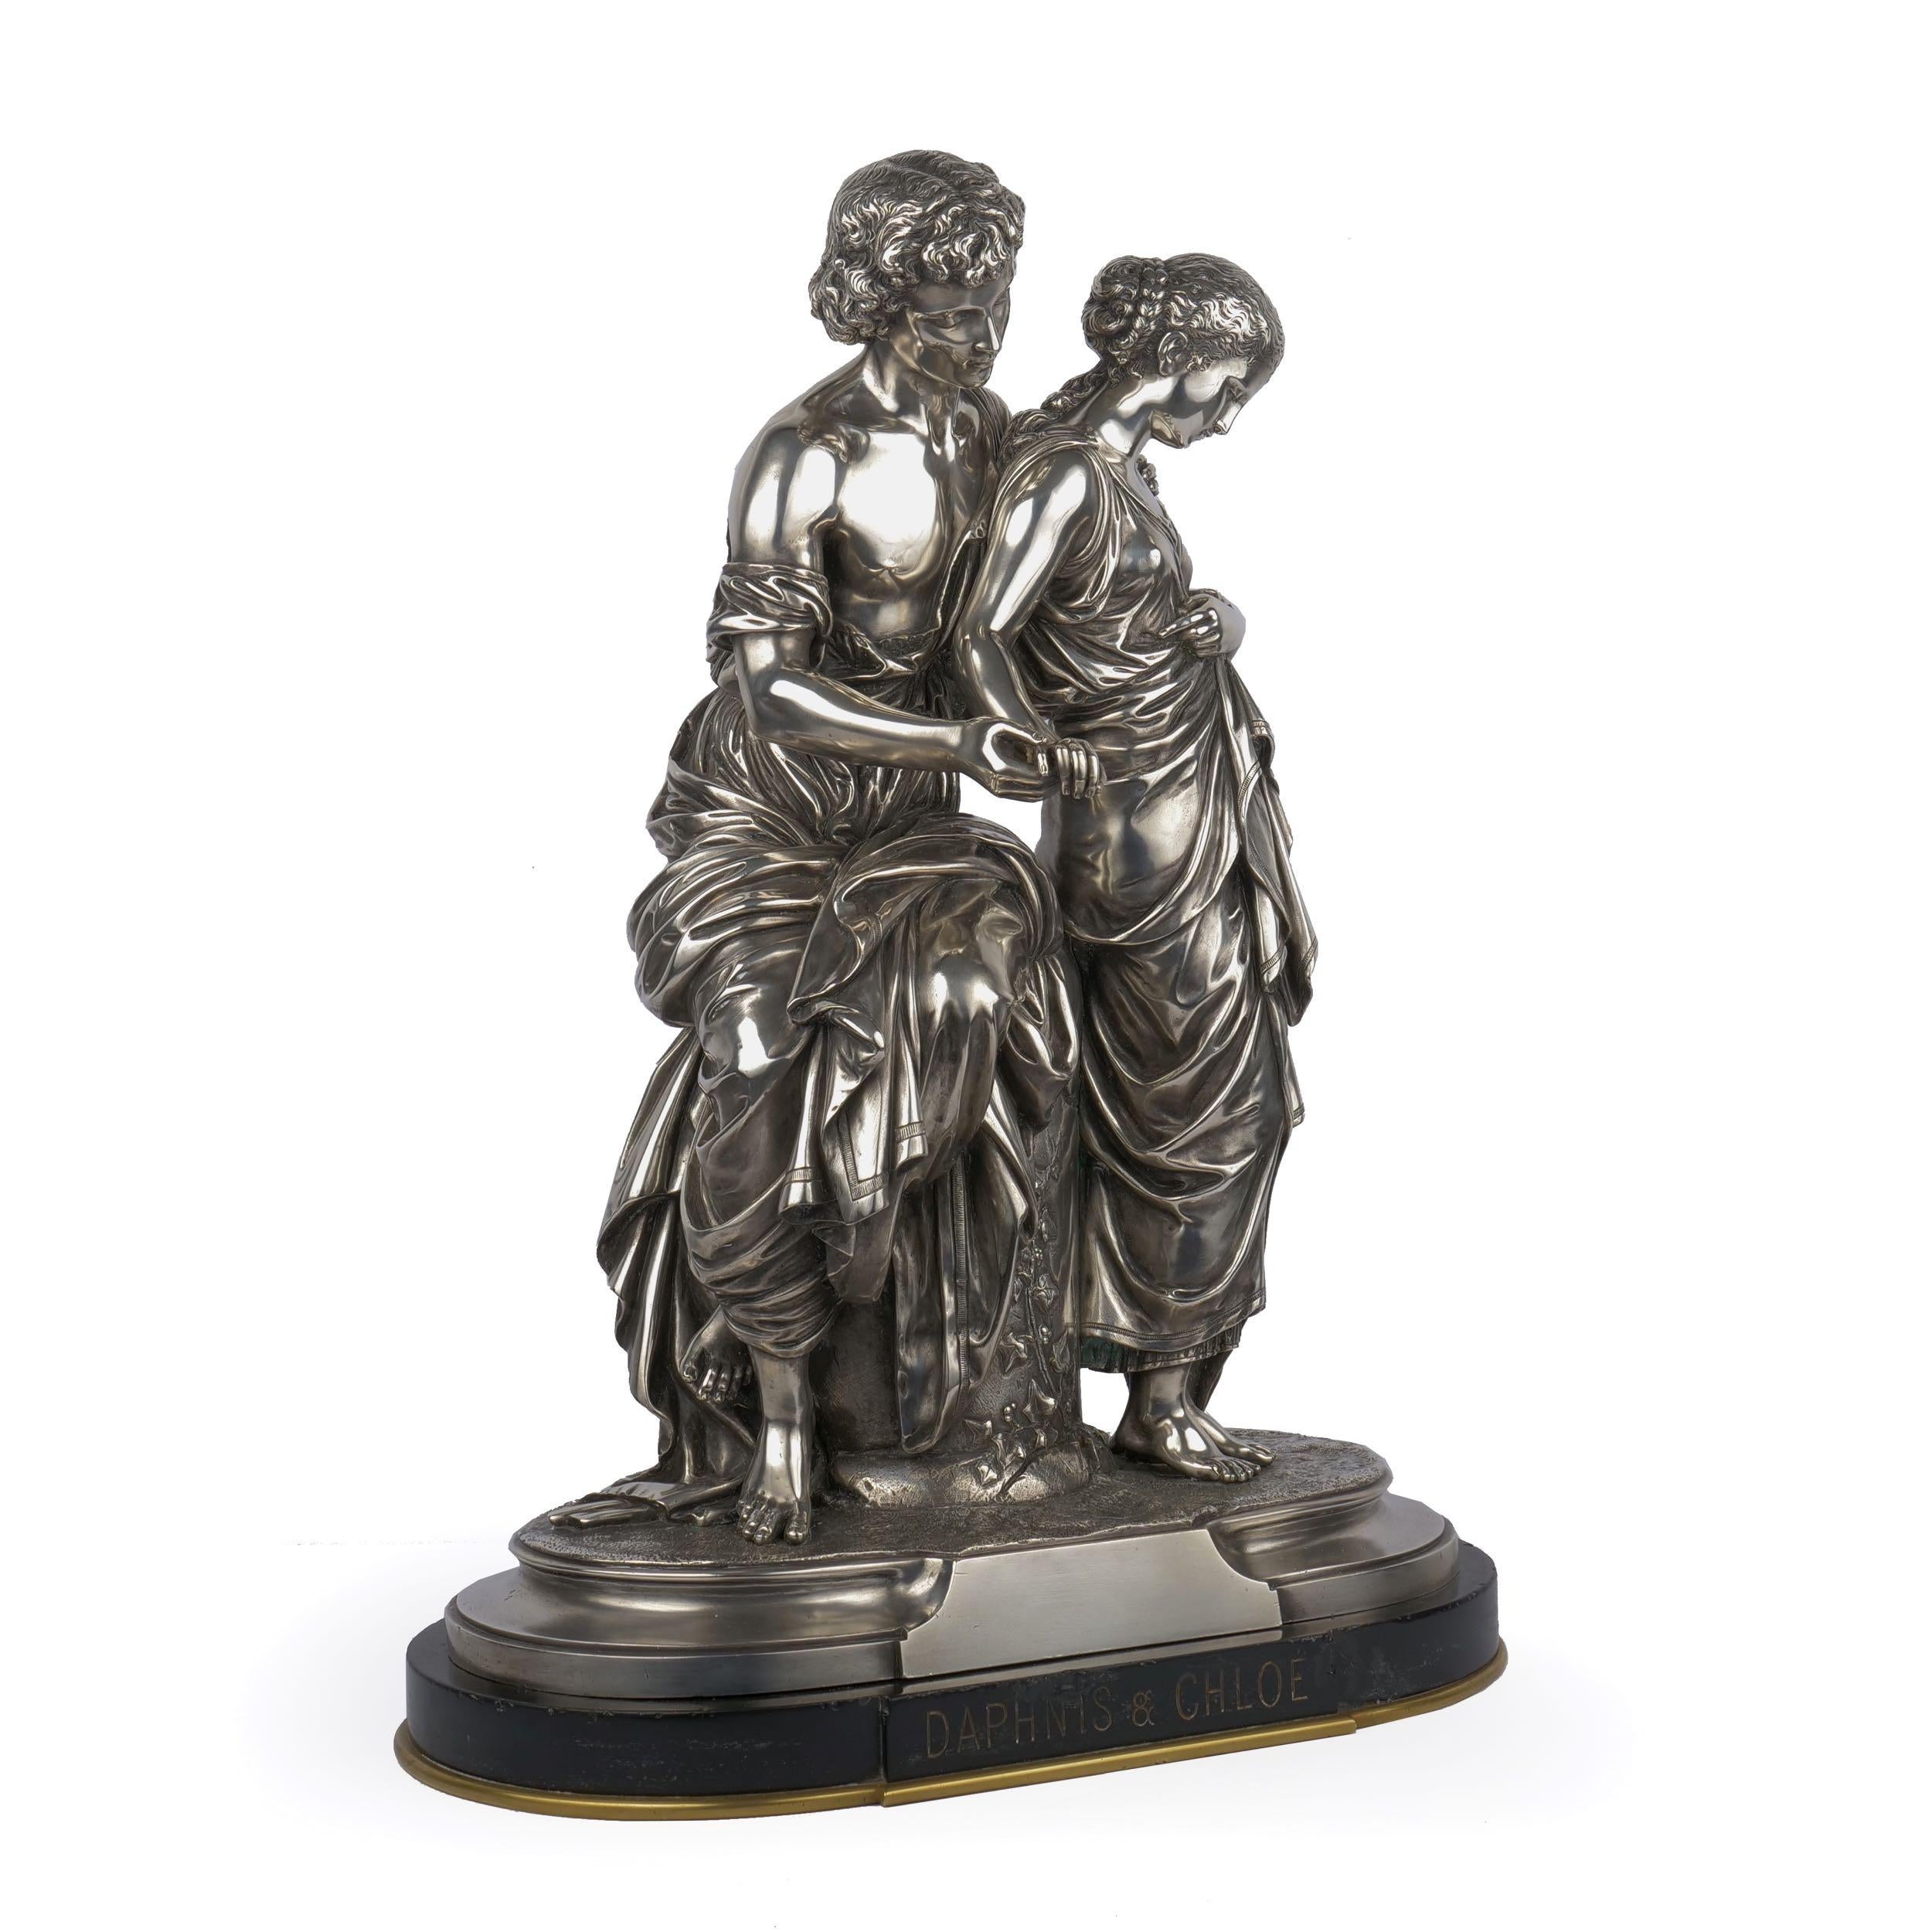 An unusually fine and rare model of Daphnis et Chloe after the model by Mathurin Moreau, the model depicts the Greek tale of the two children, each abandoned by their birth parents and raised by farmers. After finding one another, the adventure of